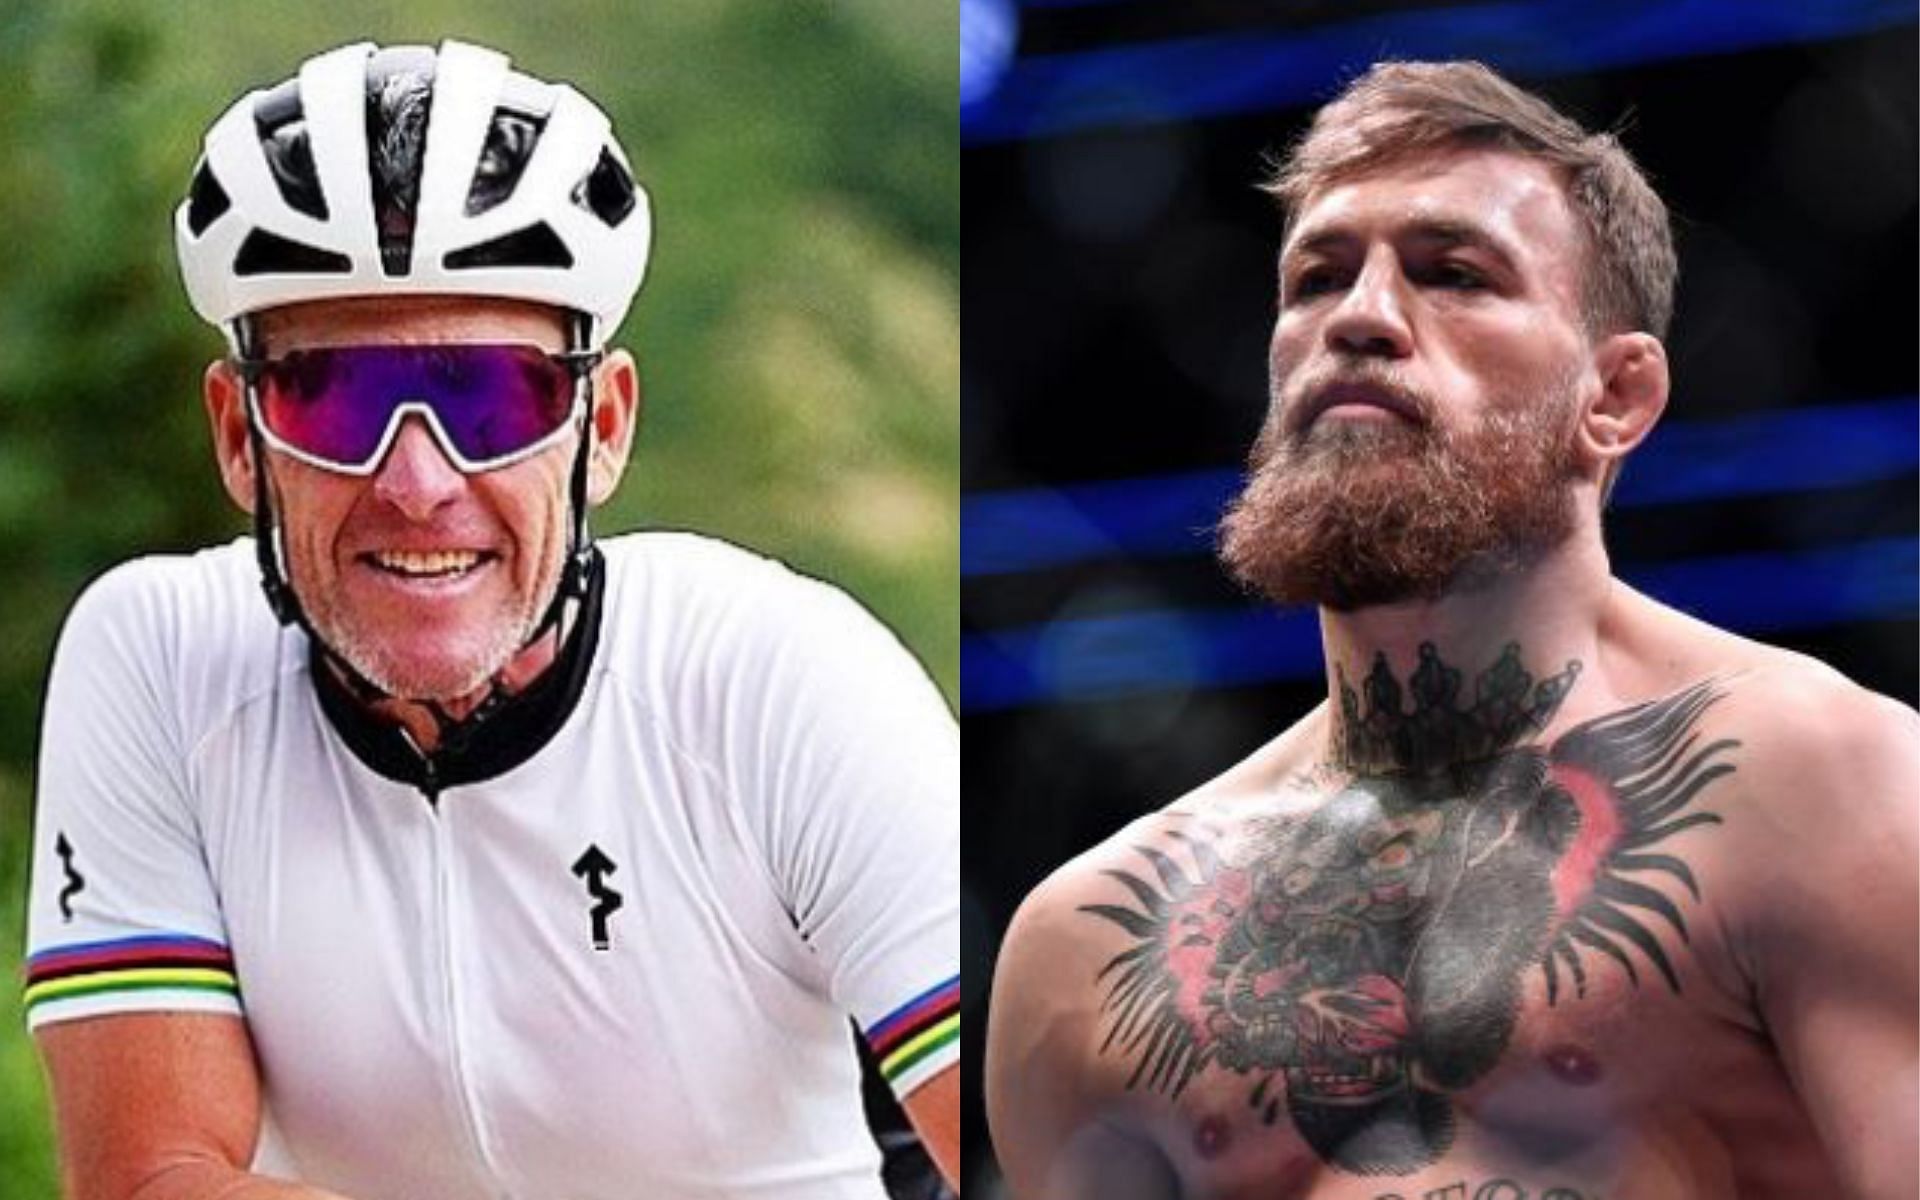 Lance Armstrong (left) and Conor McGregor (right). (via UFC and Instagram @lancearmstrong)